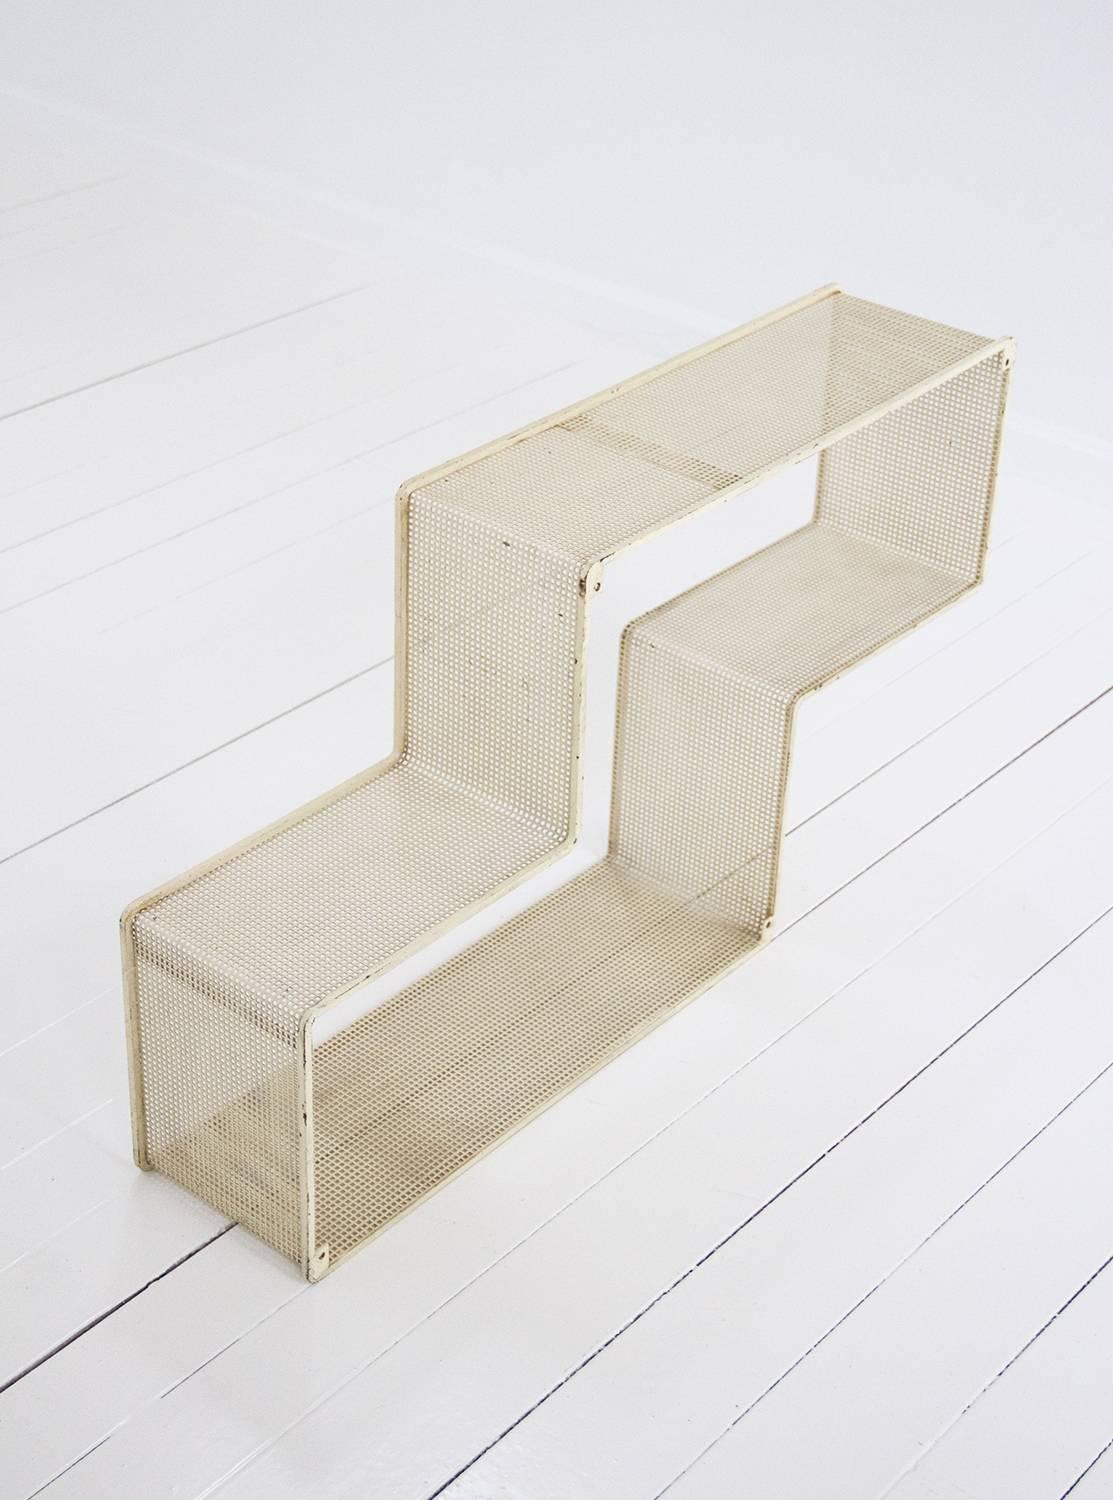 Dedal Wall Shelf by Mathieu Mategot, Perforated Steel, France, circa 1950 For Sale 1